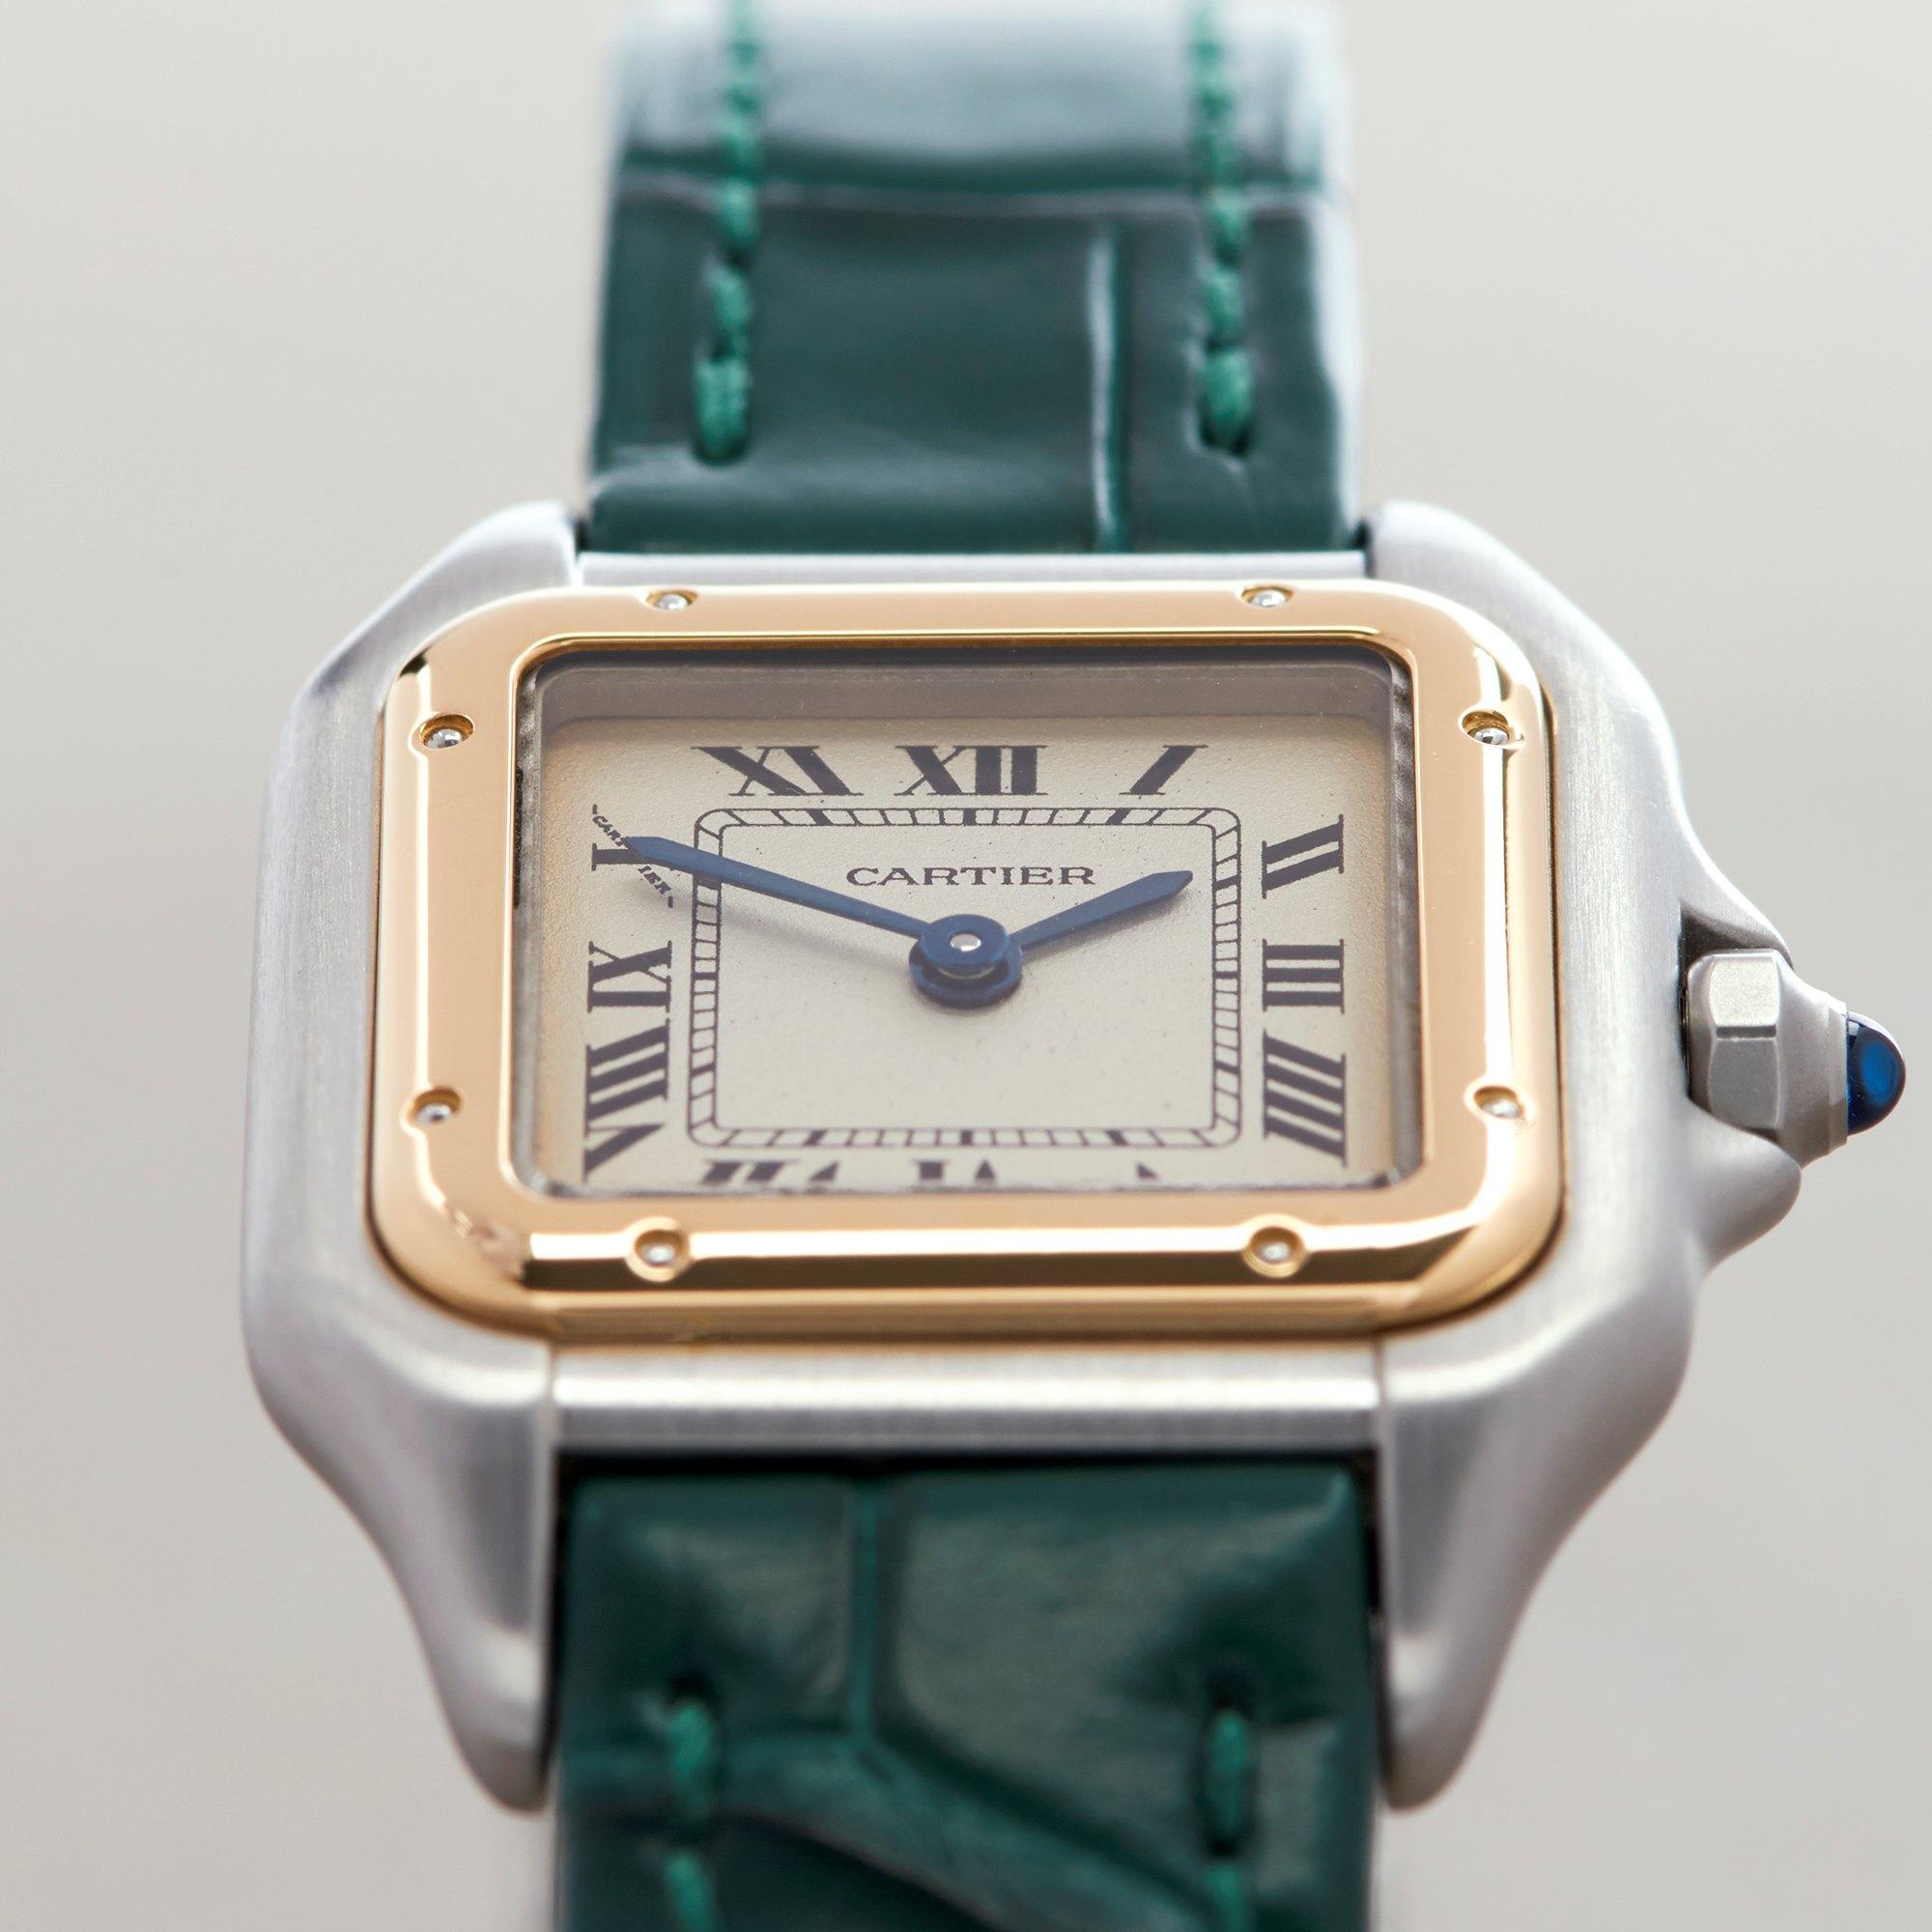 Cartier Panthère 0 1120 Ladies Yellow Gold & Stainless Steel 0 Watch 2